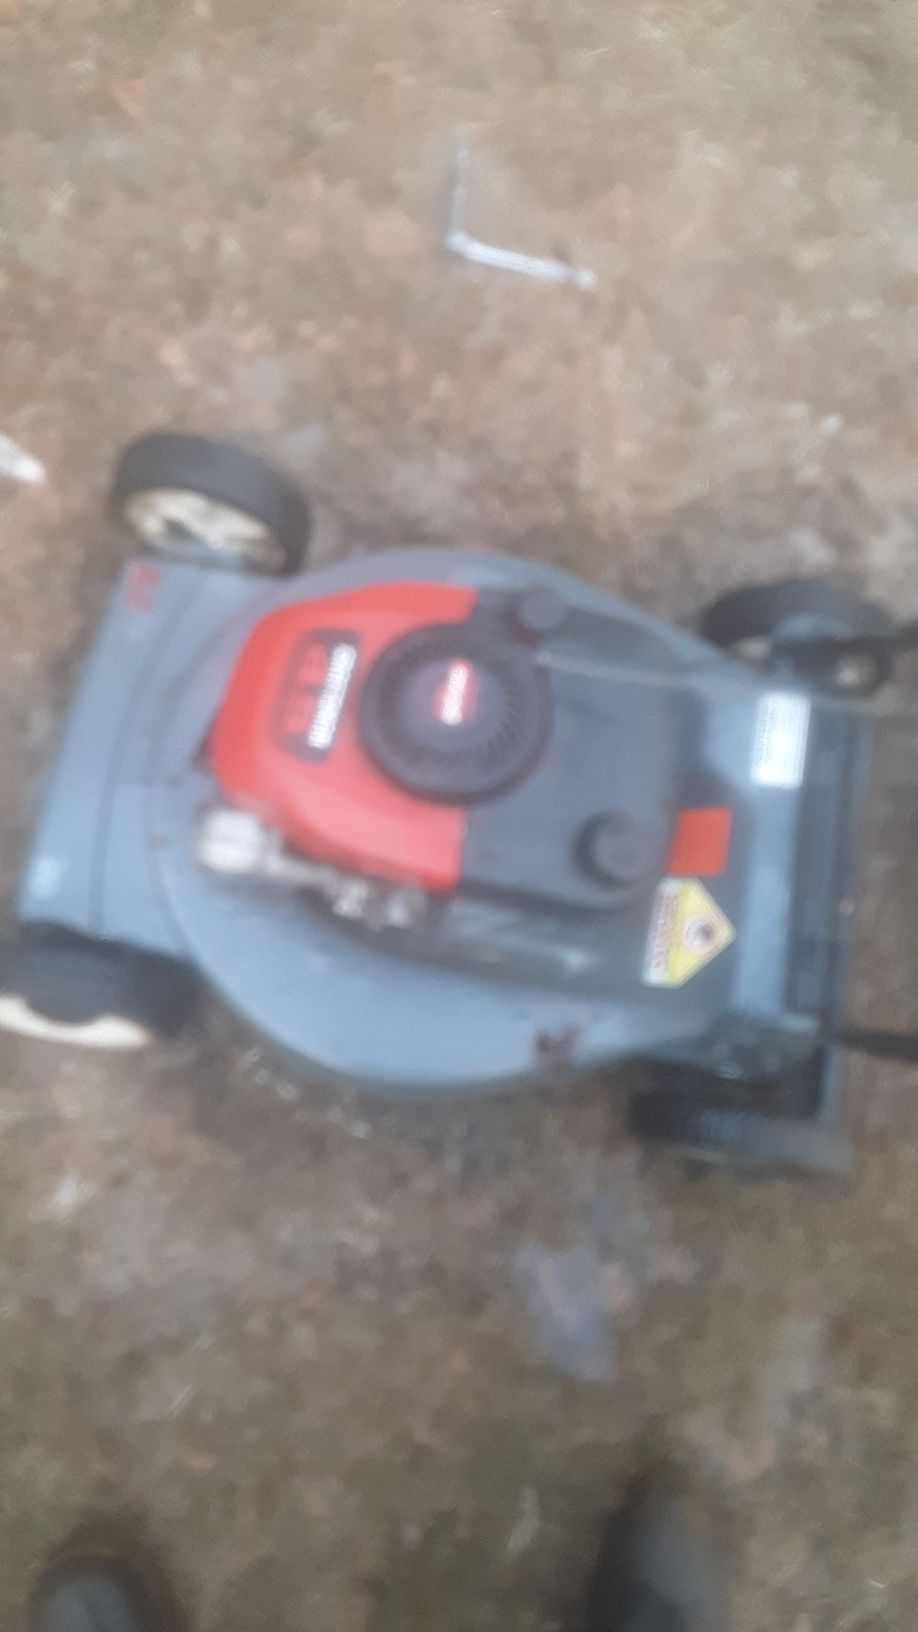 Craftsman push mower runs an cuts very good nothing wrong with it